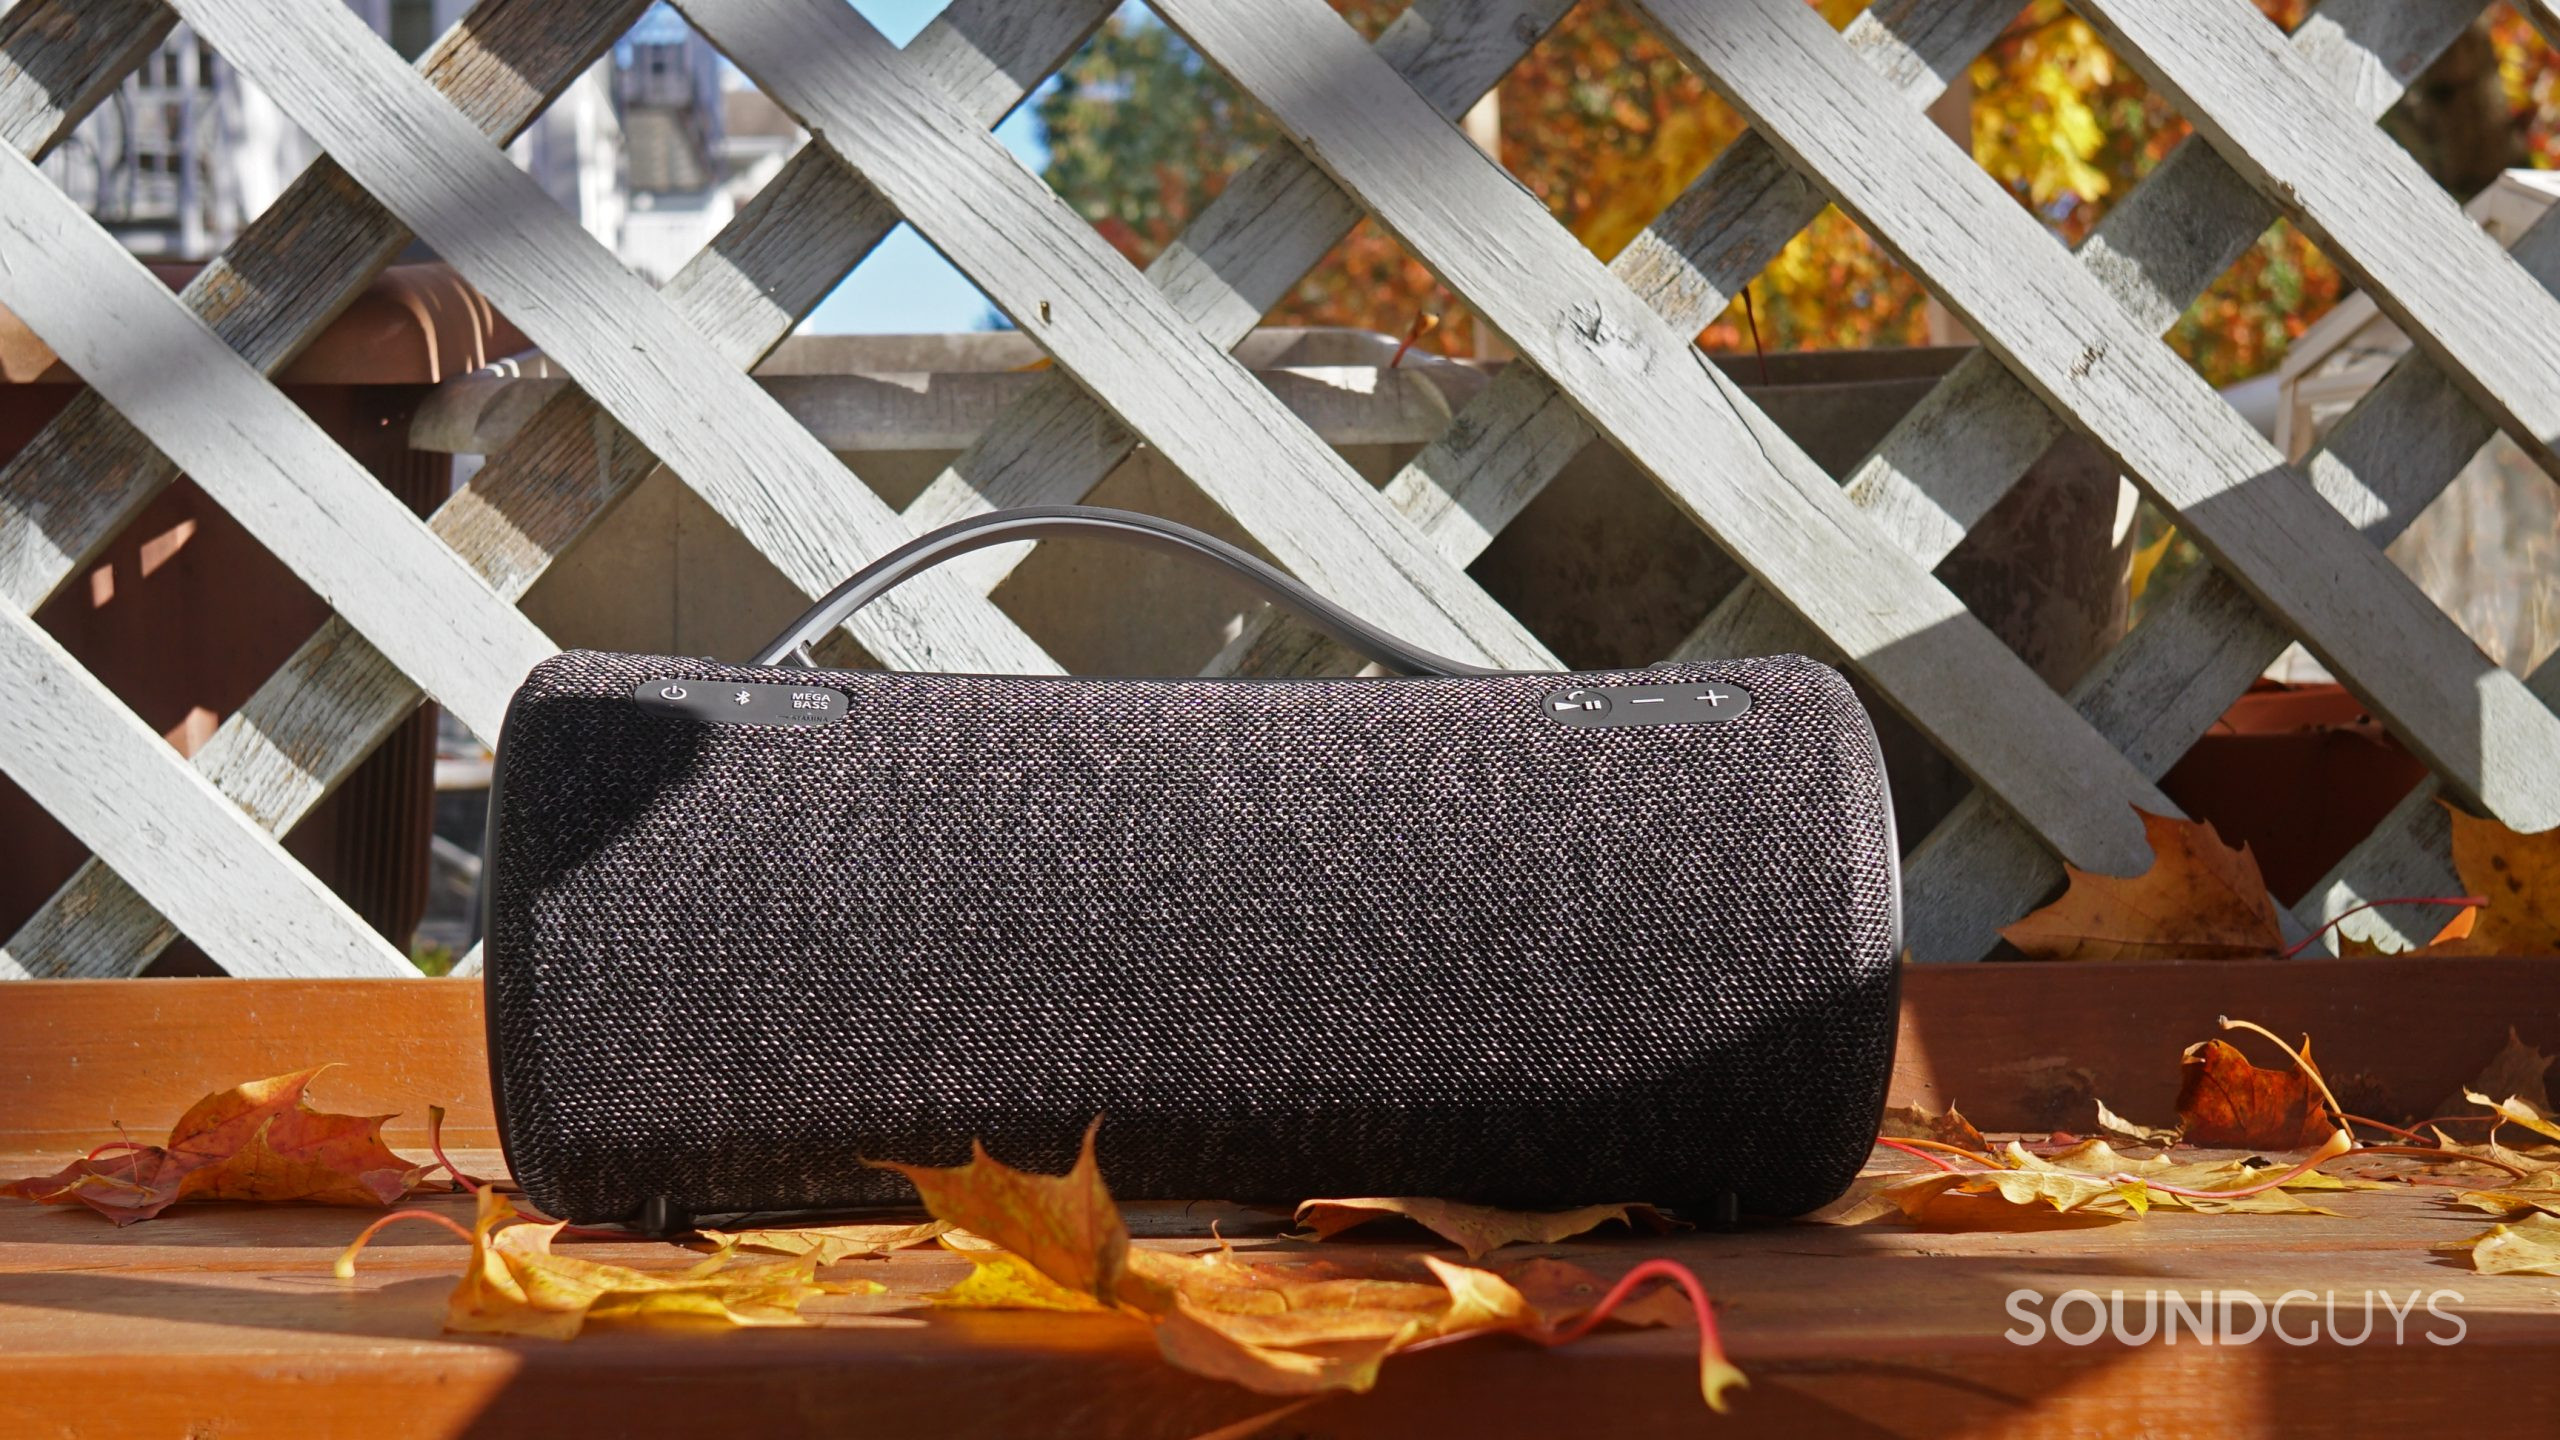 The Sony SRS-XG300 sits on a wooden surface surrounded by an autumnal spread of fallen leaves.